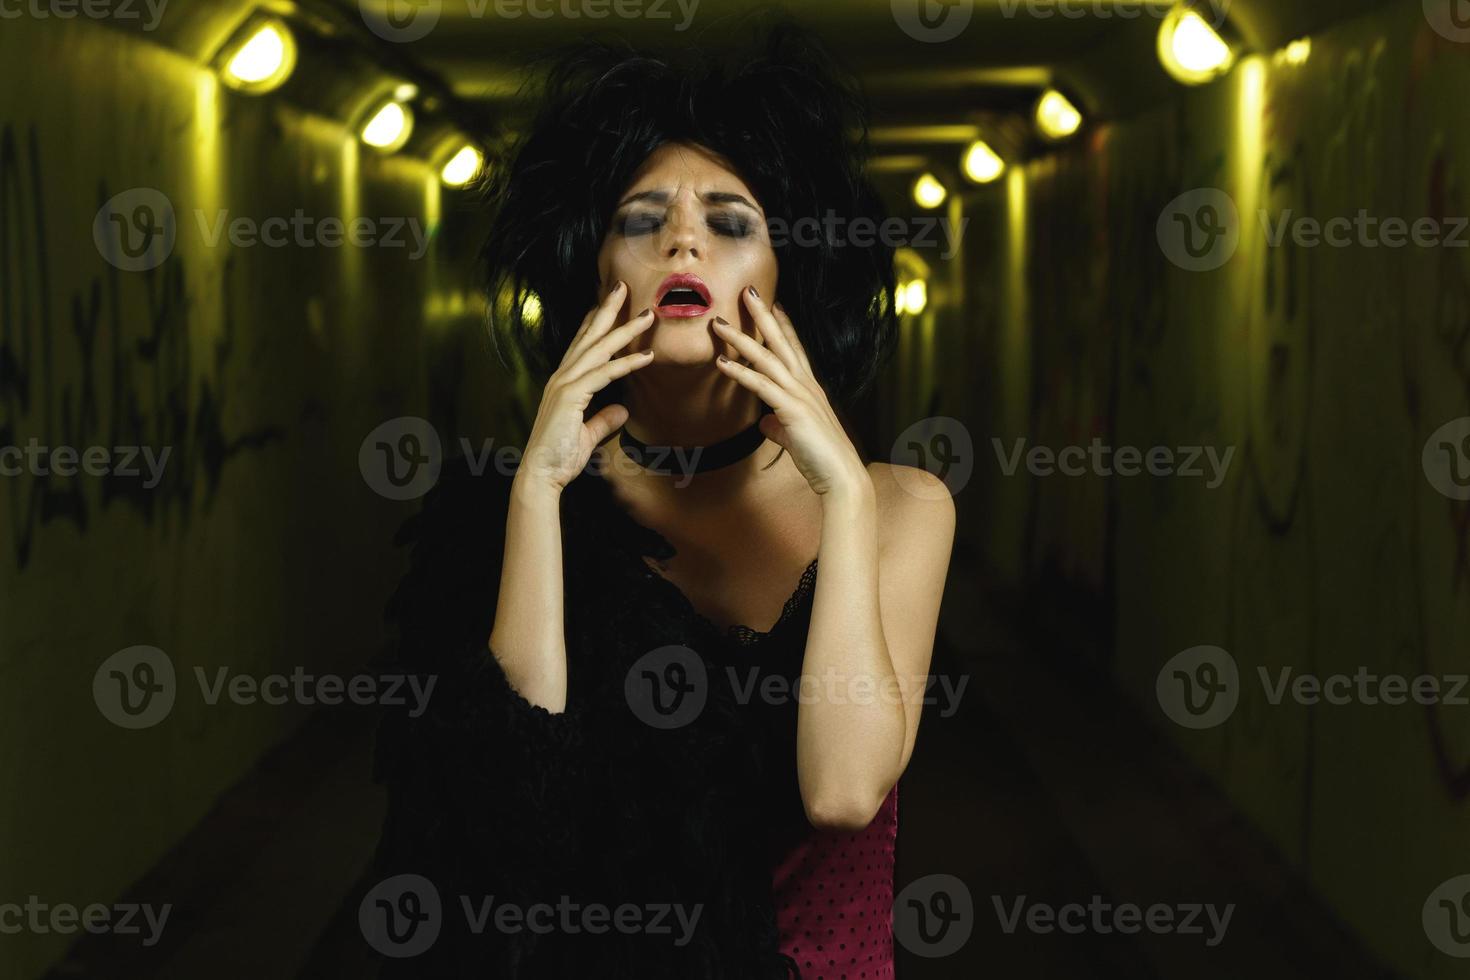 Strange and freaky woman in the dark tunnel photo